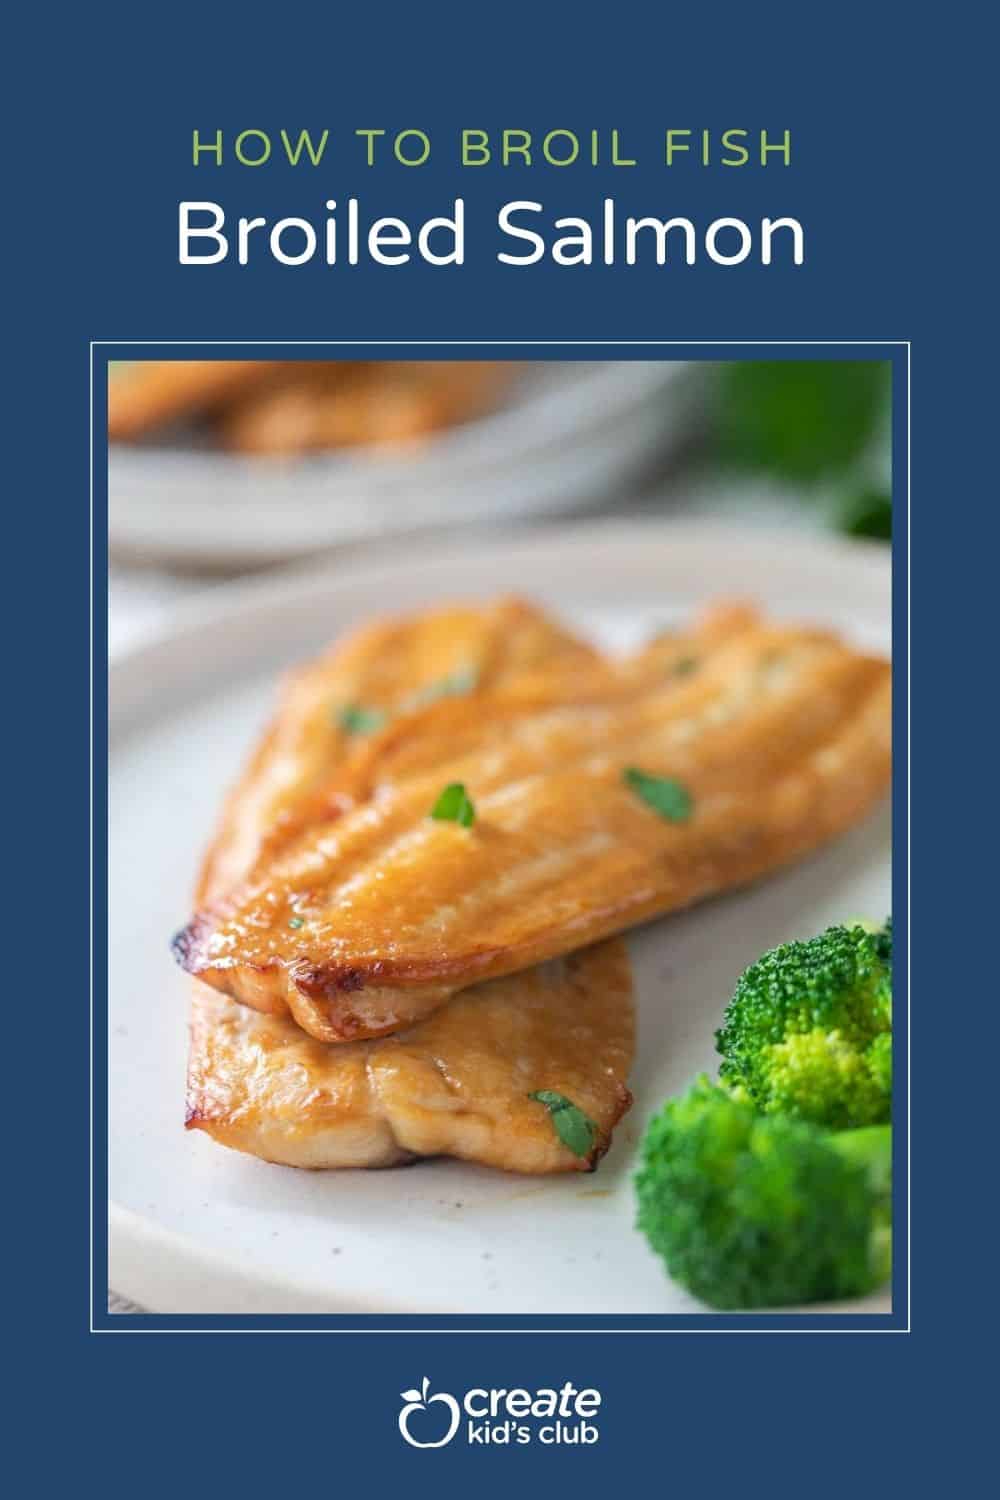 A Pin of broiled salmon on a plate.